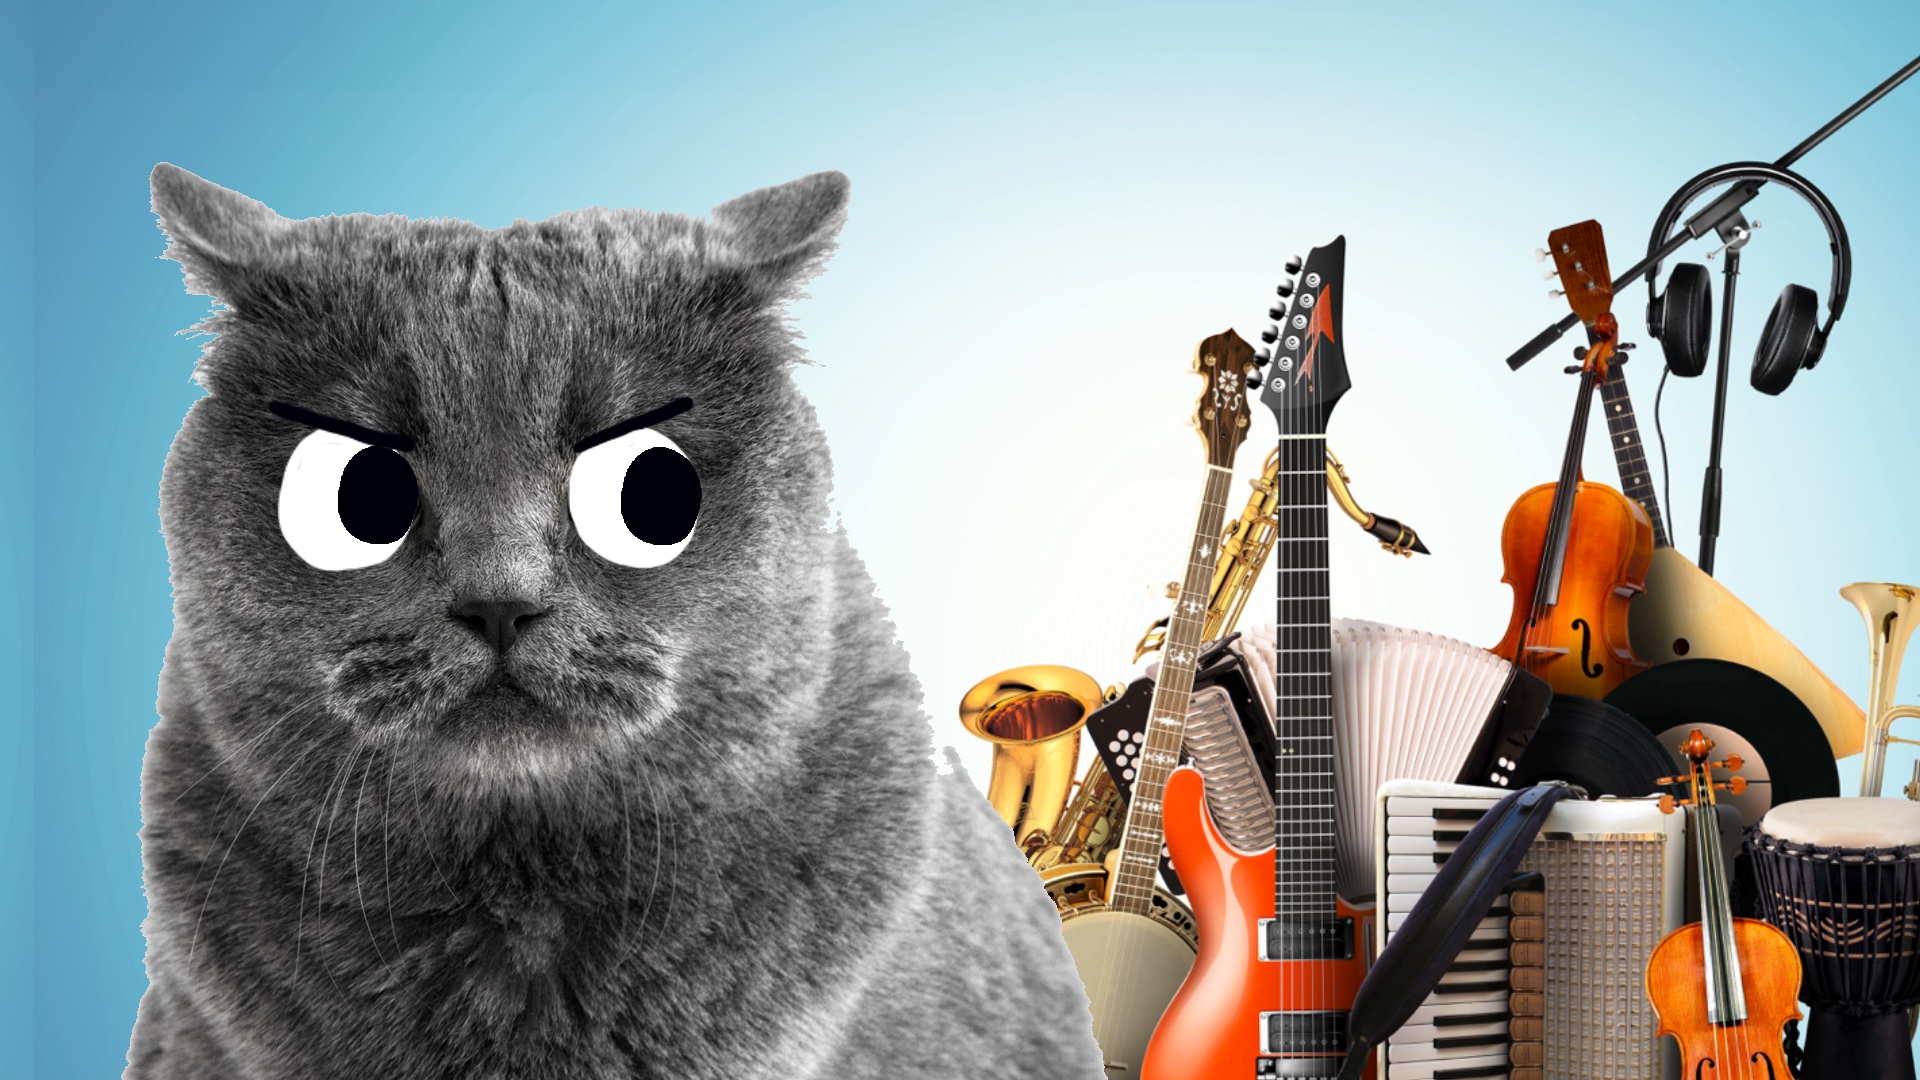 A cat glares at a selection of instruments